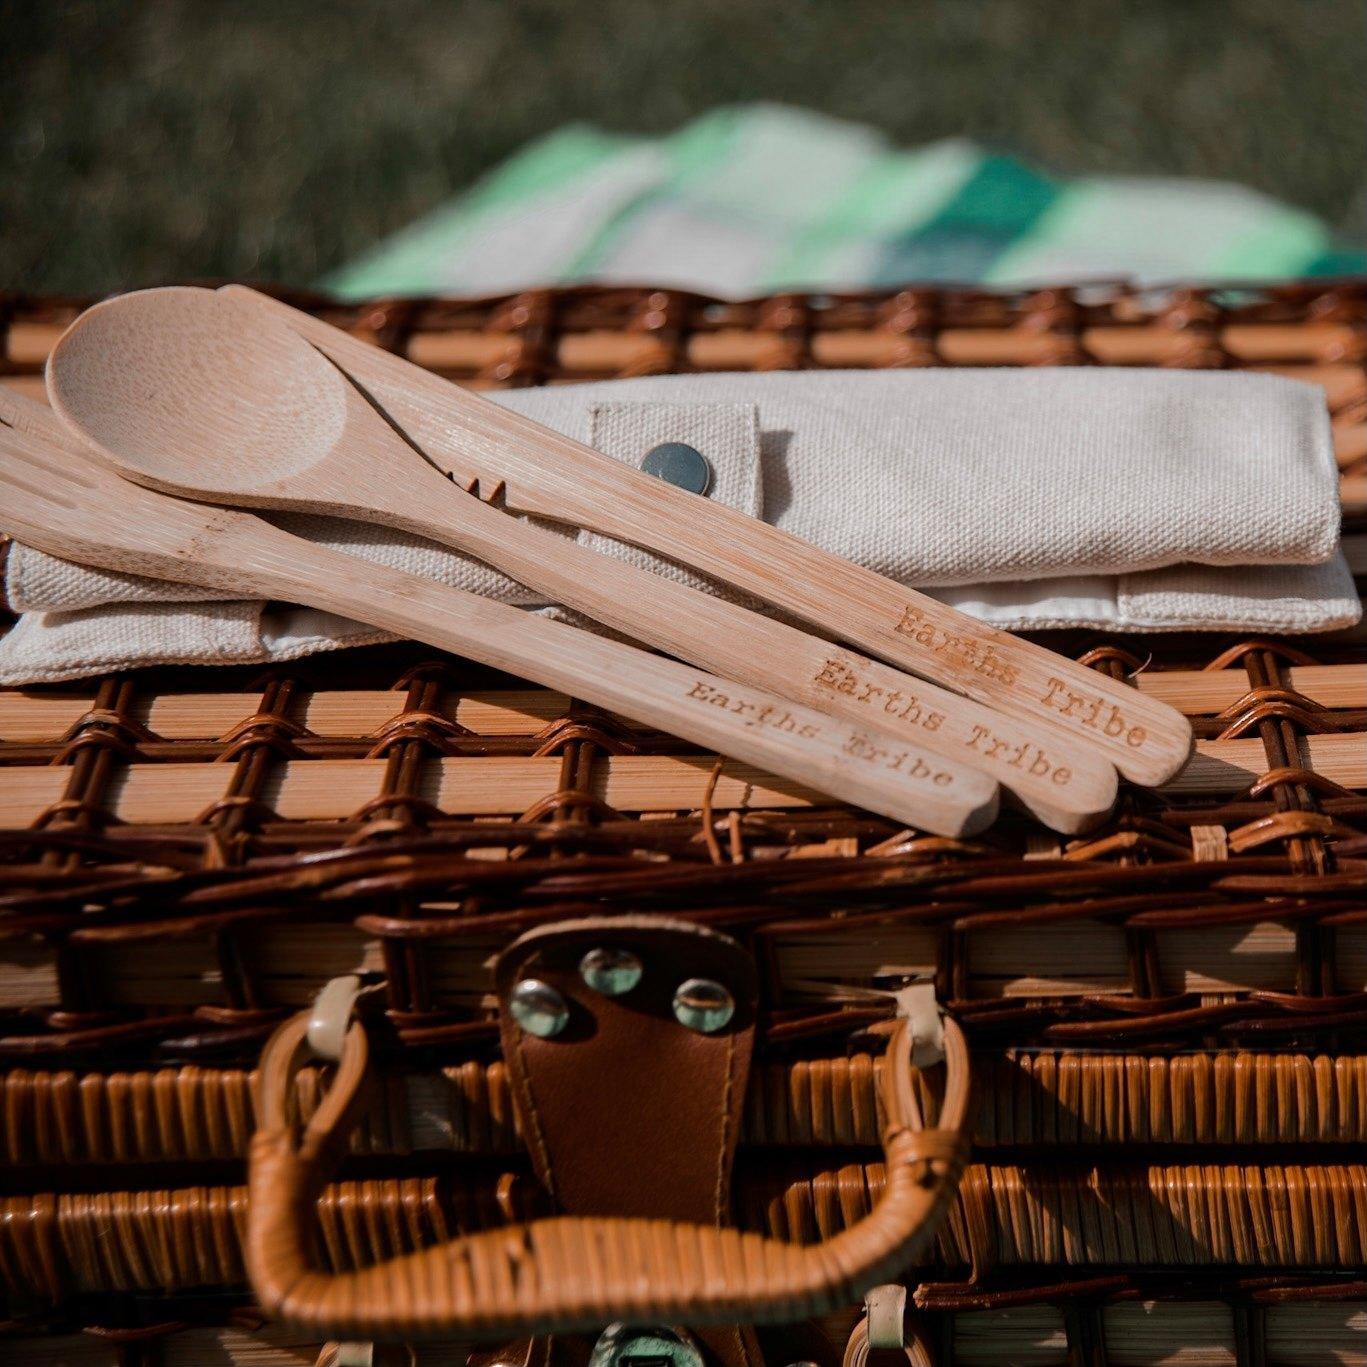 Earths Tribe | Bamboo Cutlery Travel Set